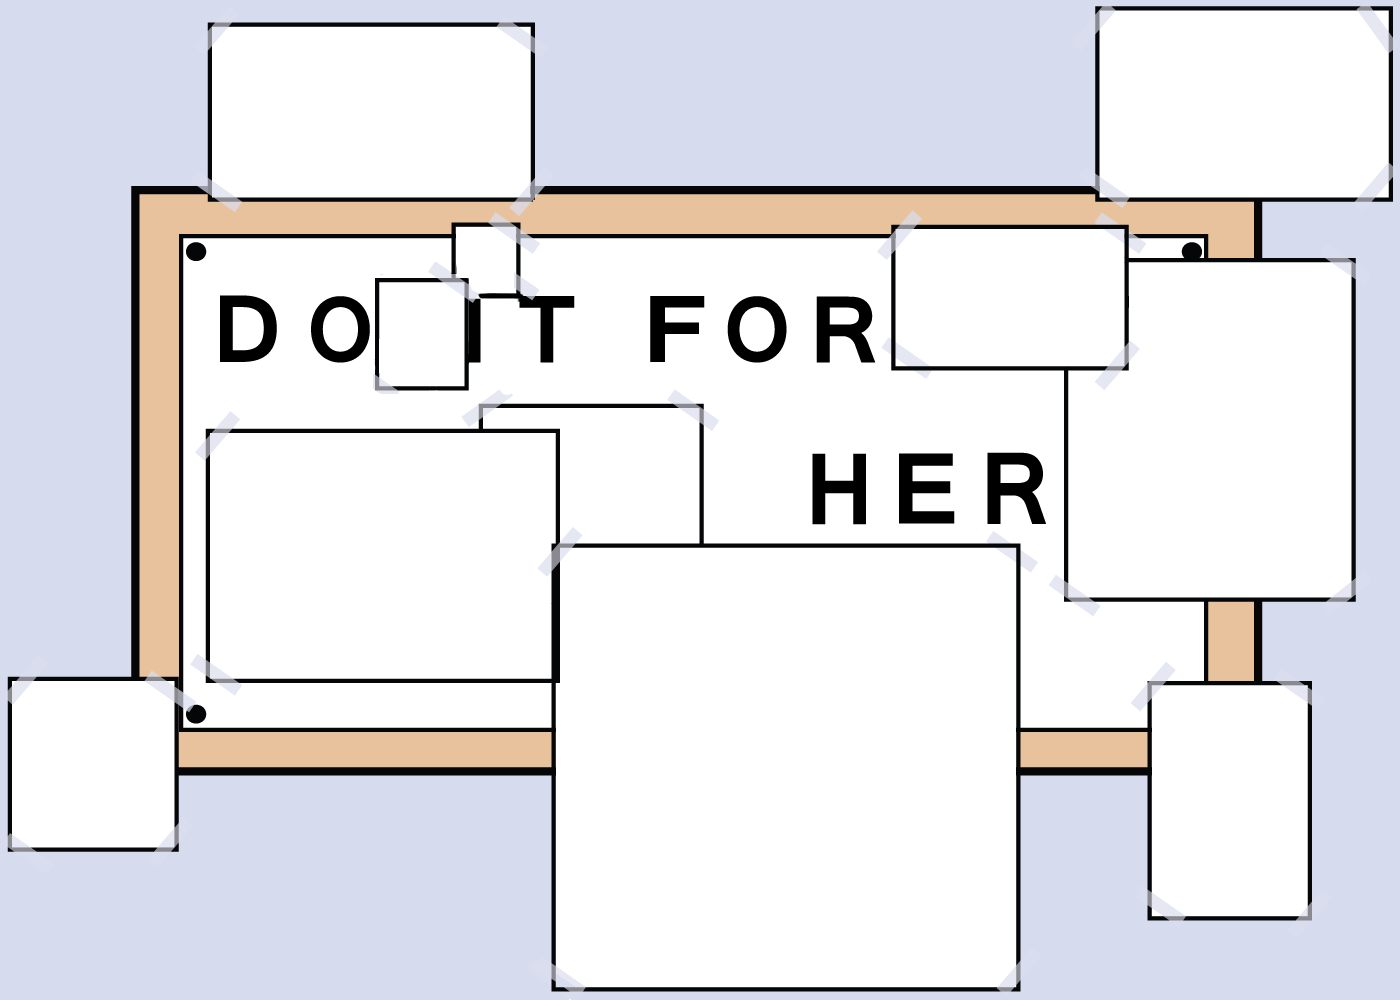 Do it for her, from the Simpsons